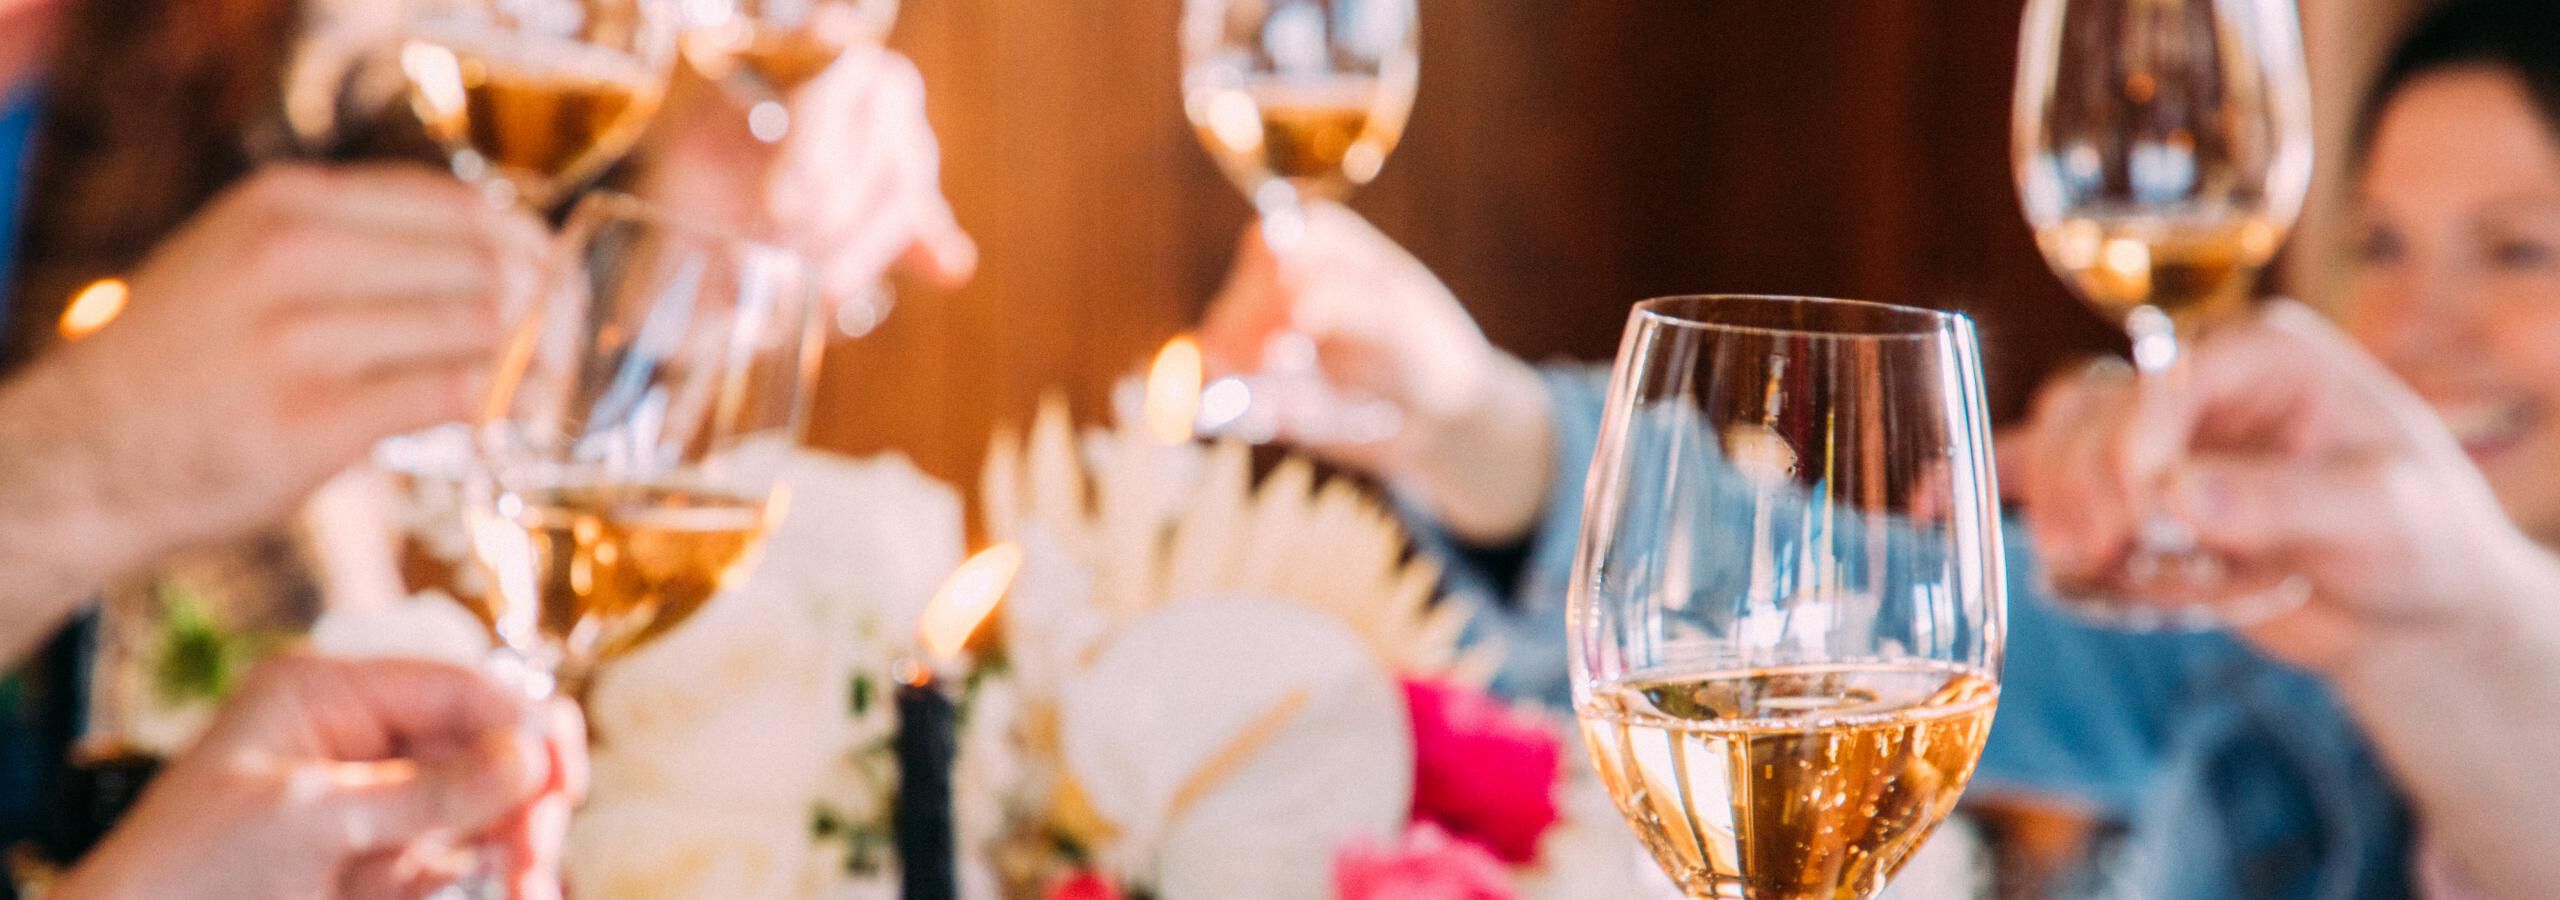 Gathering of people around a table with flowers all holding up glasses of white wine